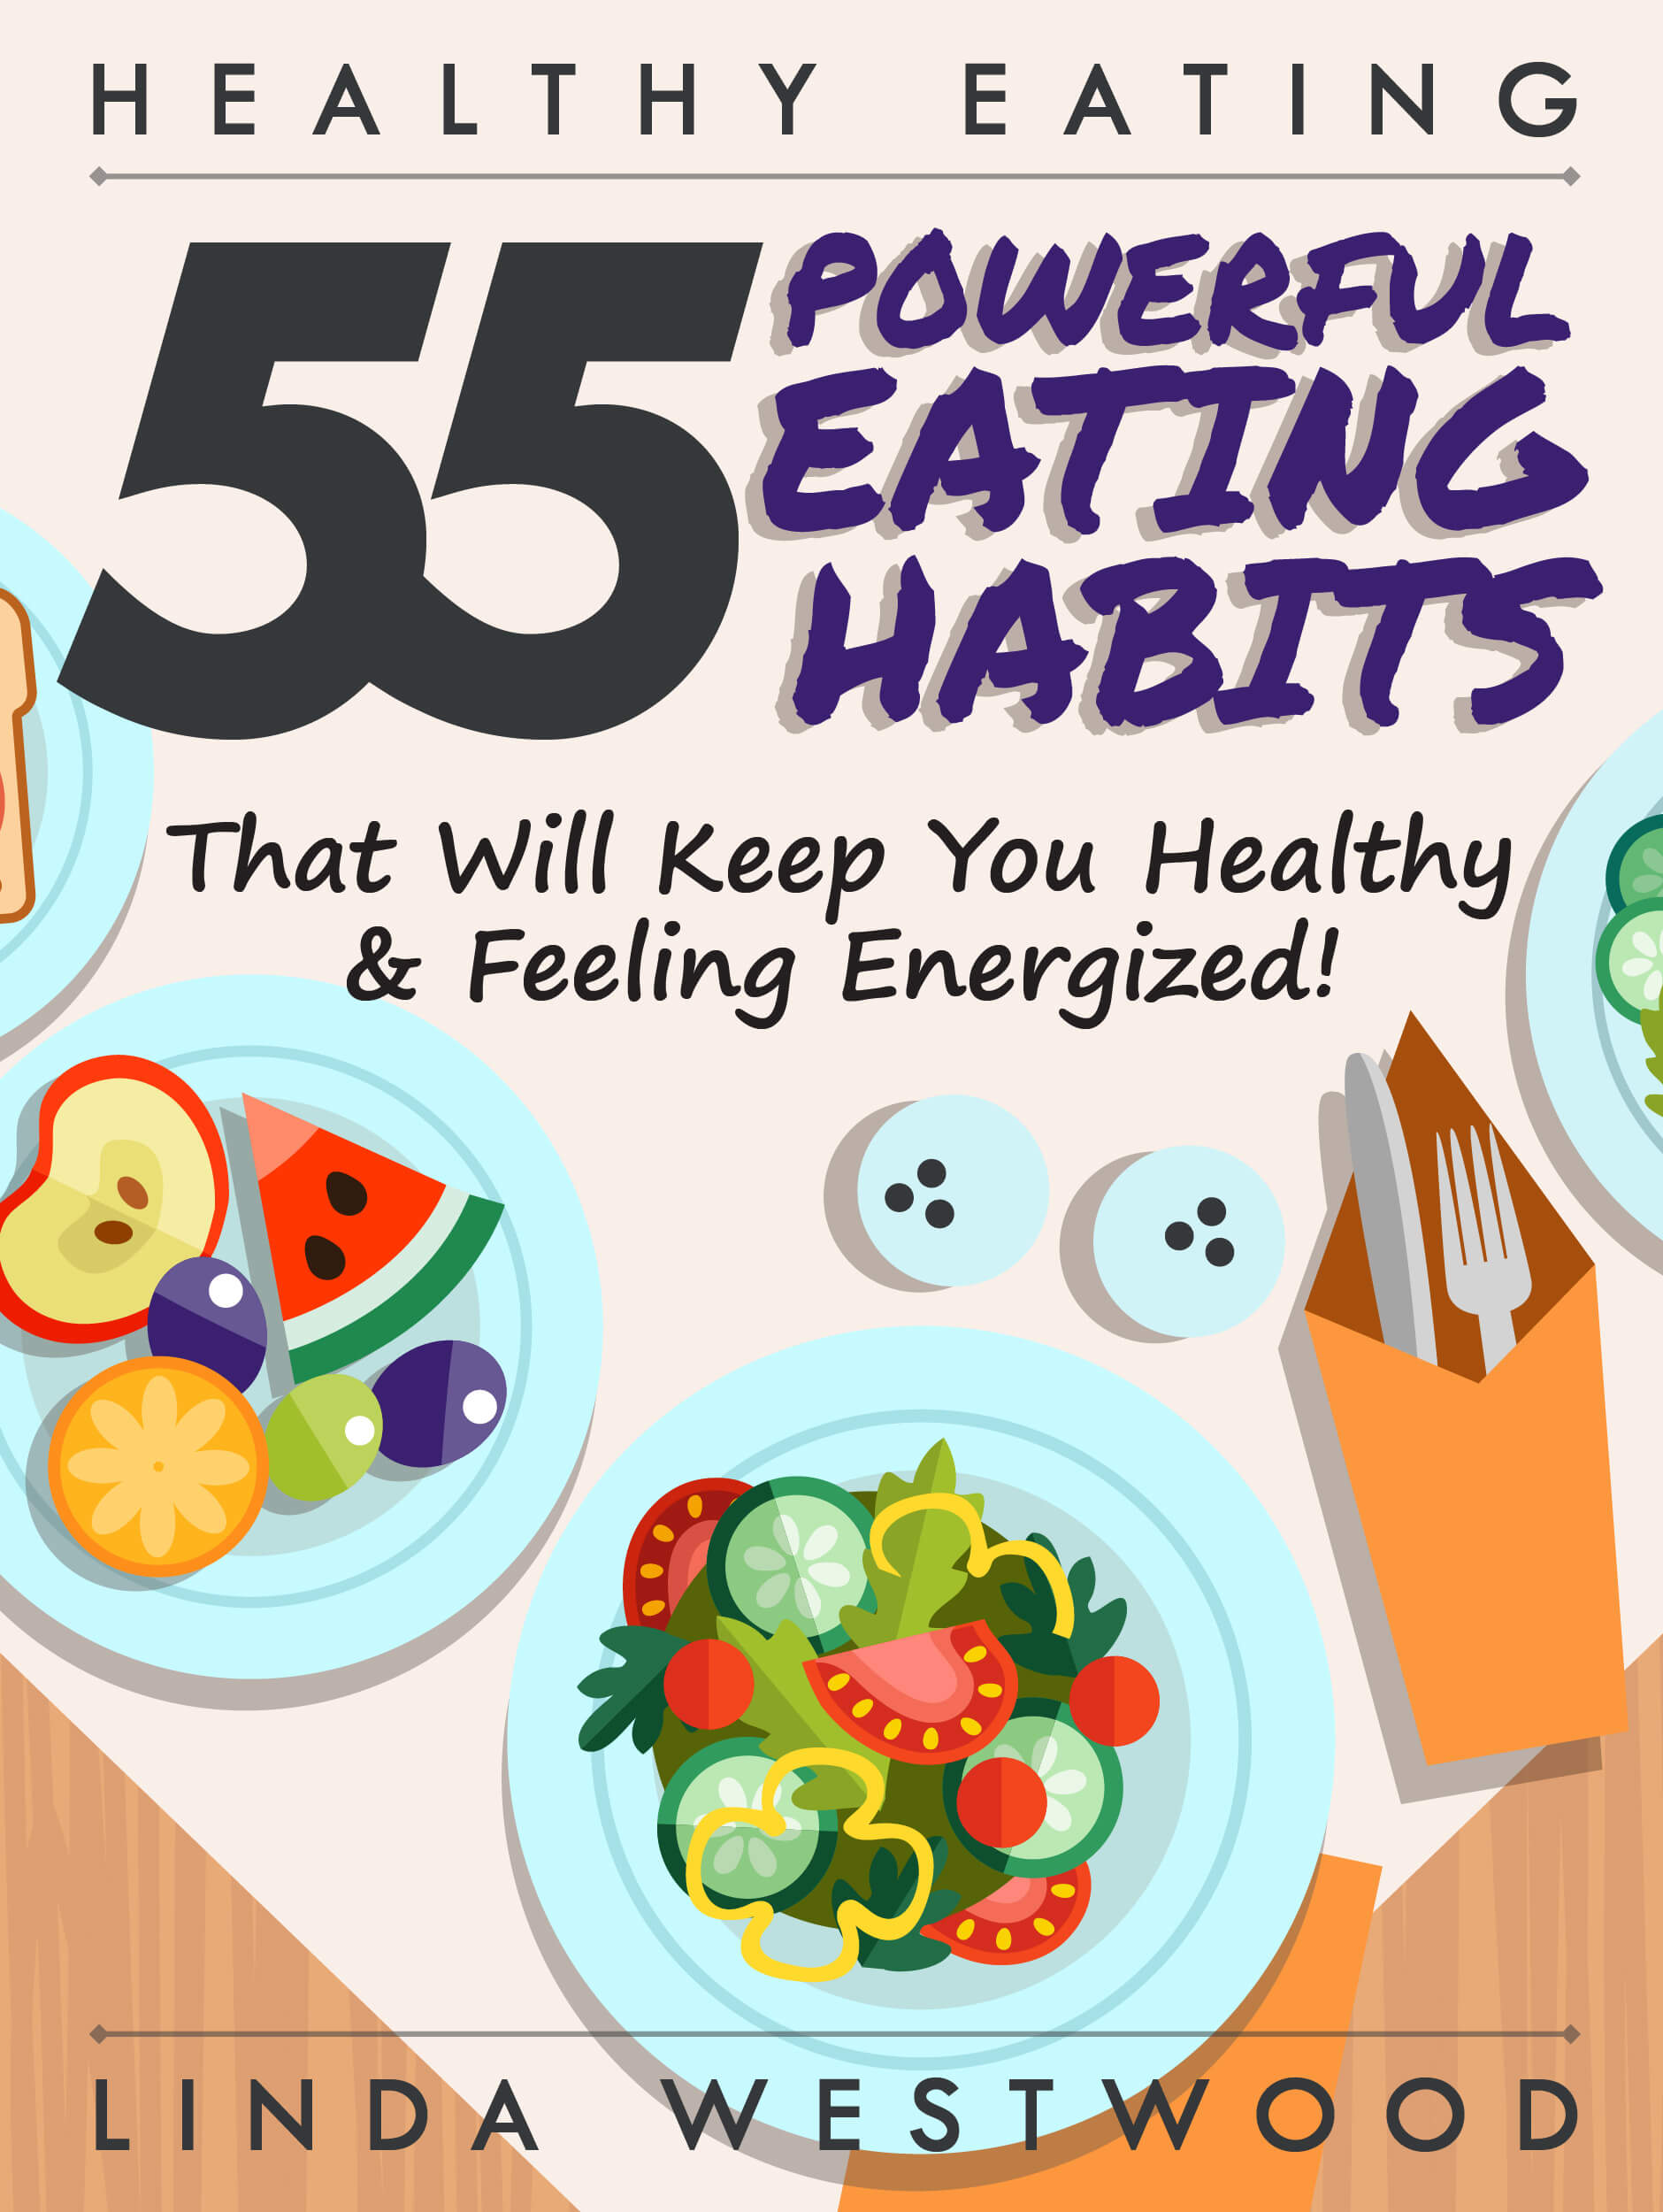 FREE: Healthy Eating (3rd Edition): 55 POWERFUL Eating Habits That Will Keep You Healthy & Feeling Energized! by Linda Westwood